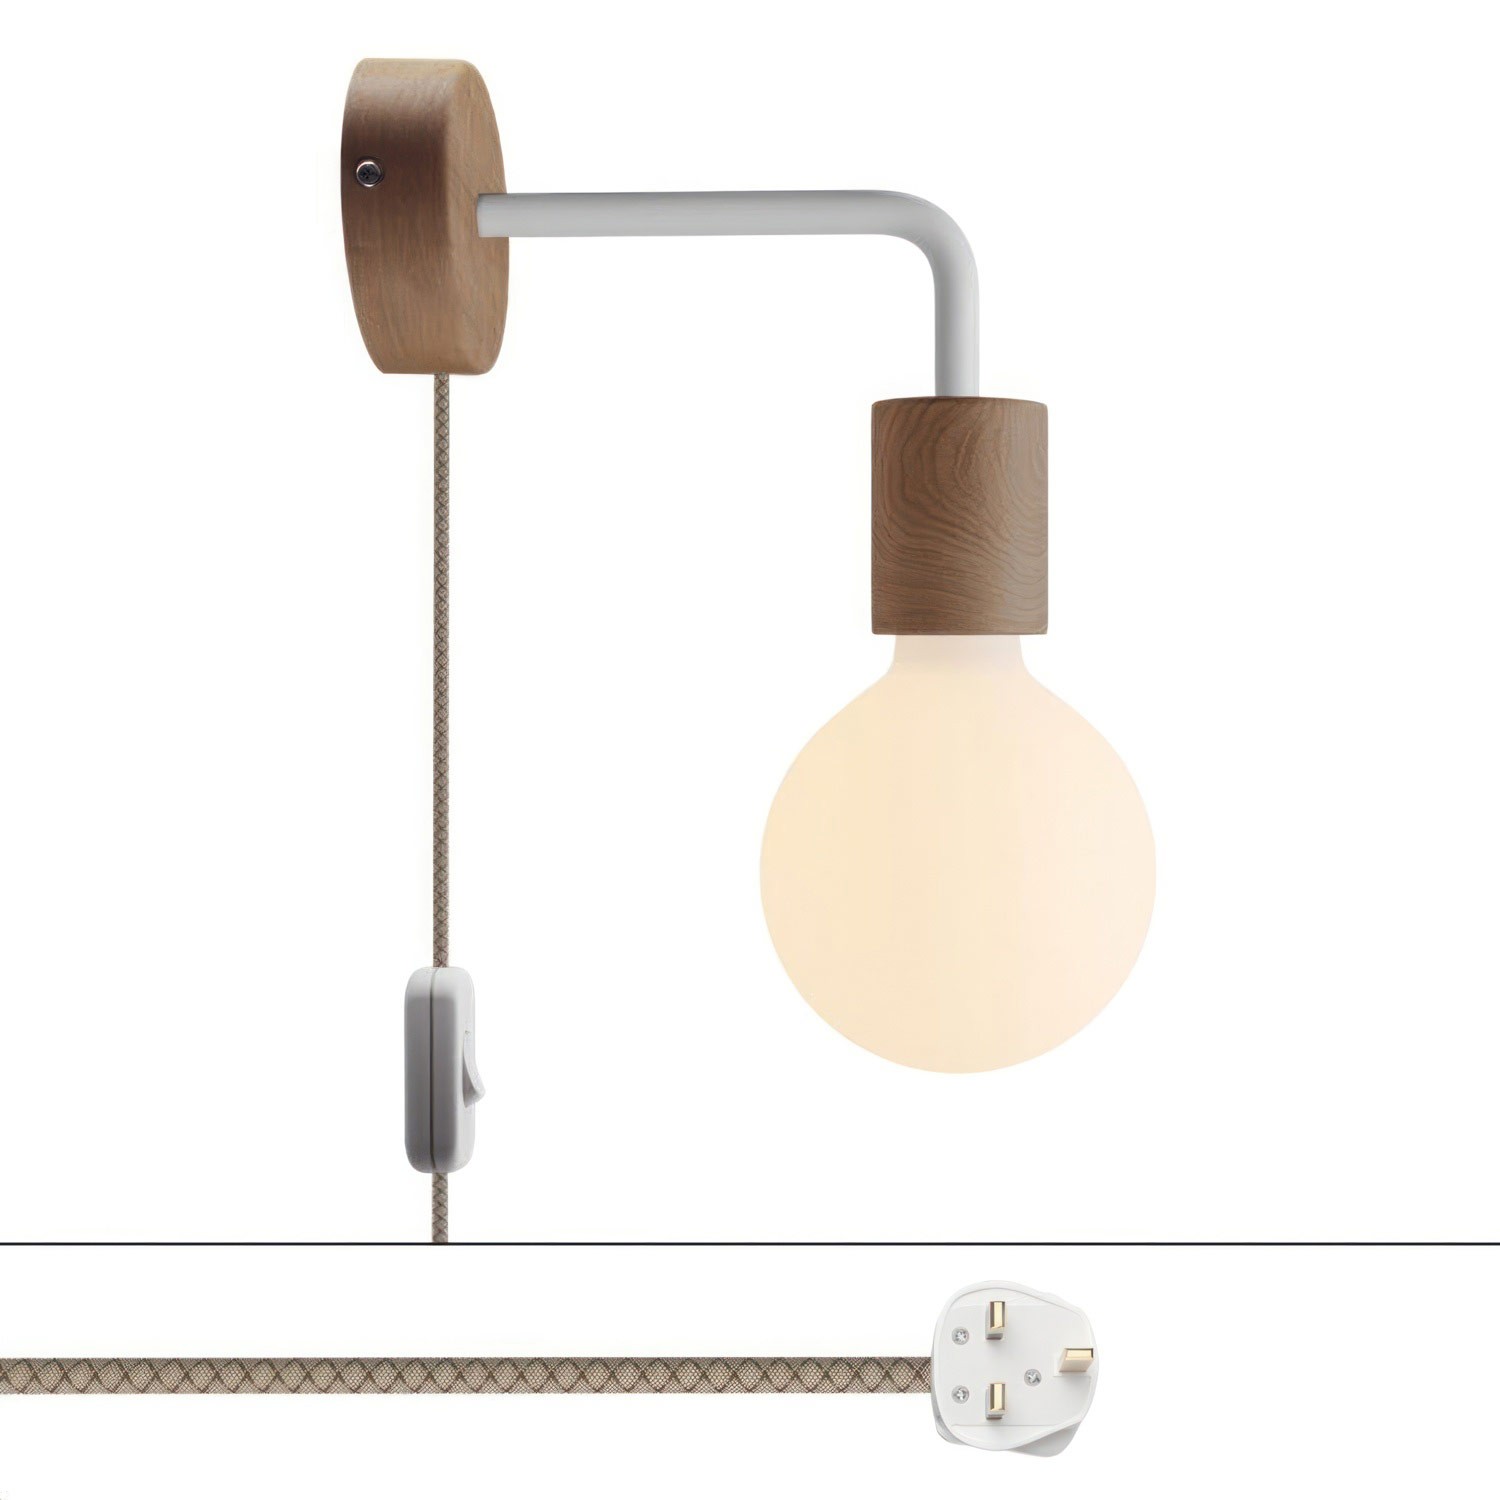 Spostaluce wooden Lamp with curved extension and UK plug